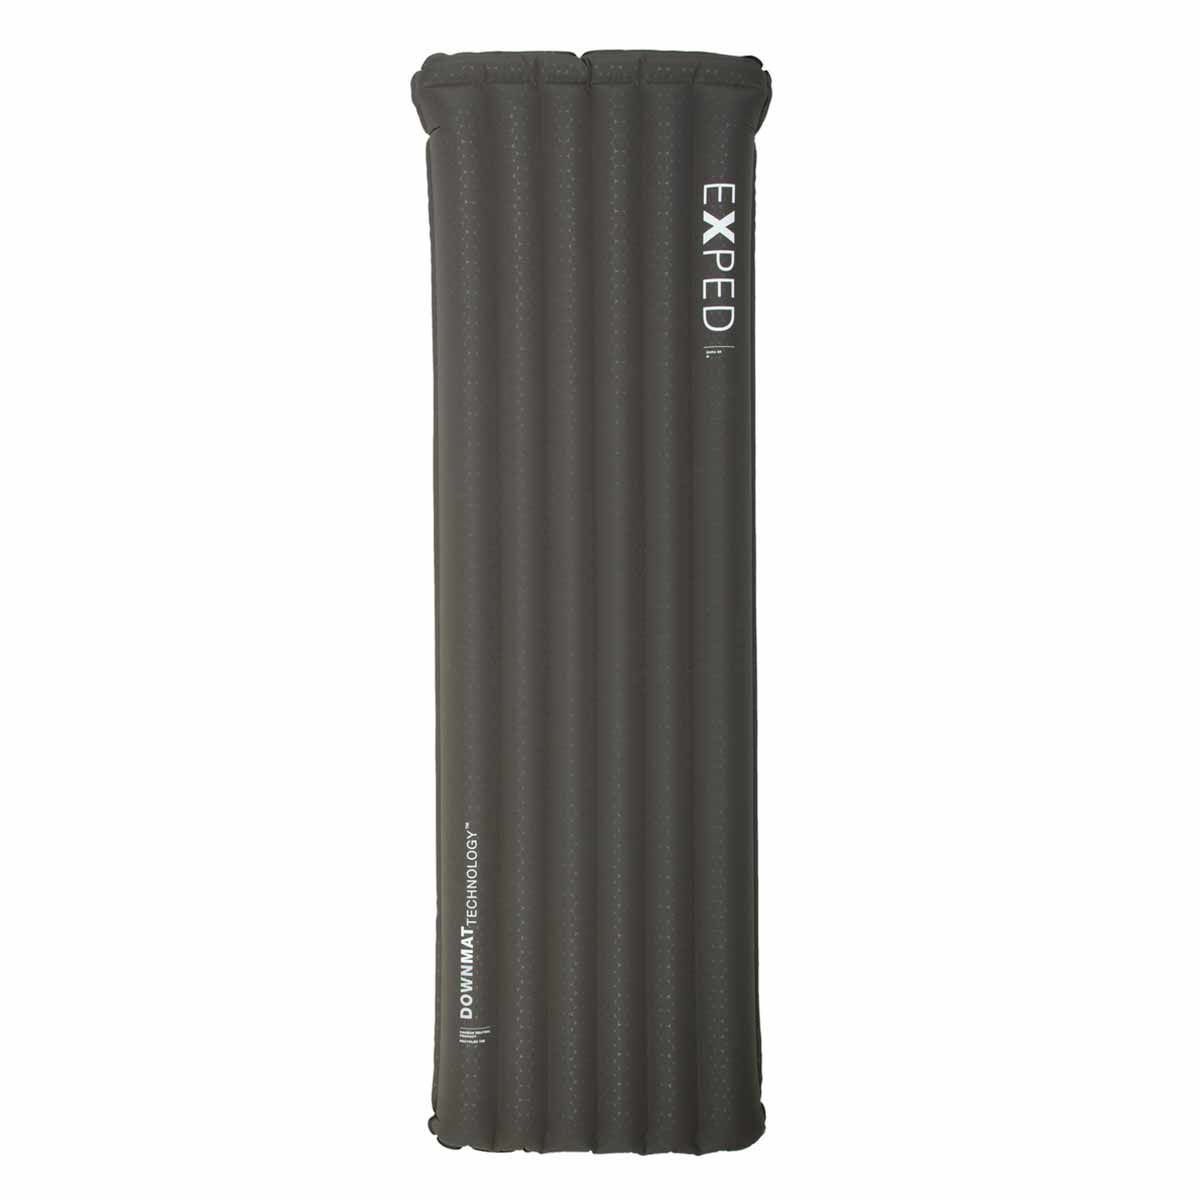 Exped Dura 8R inflatable sleeping pad